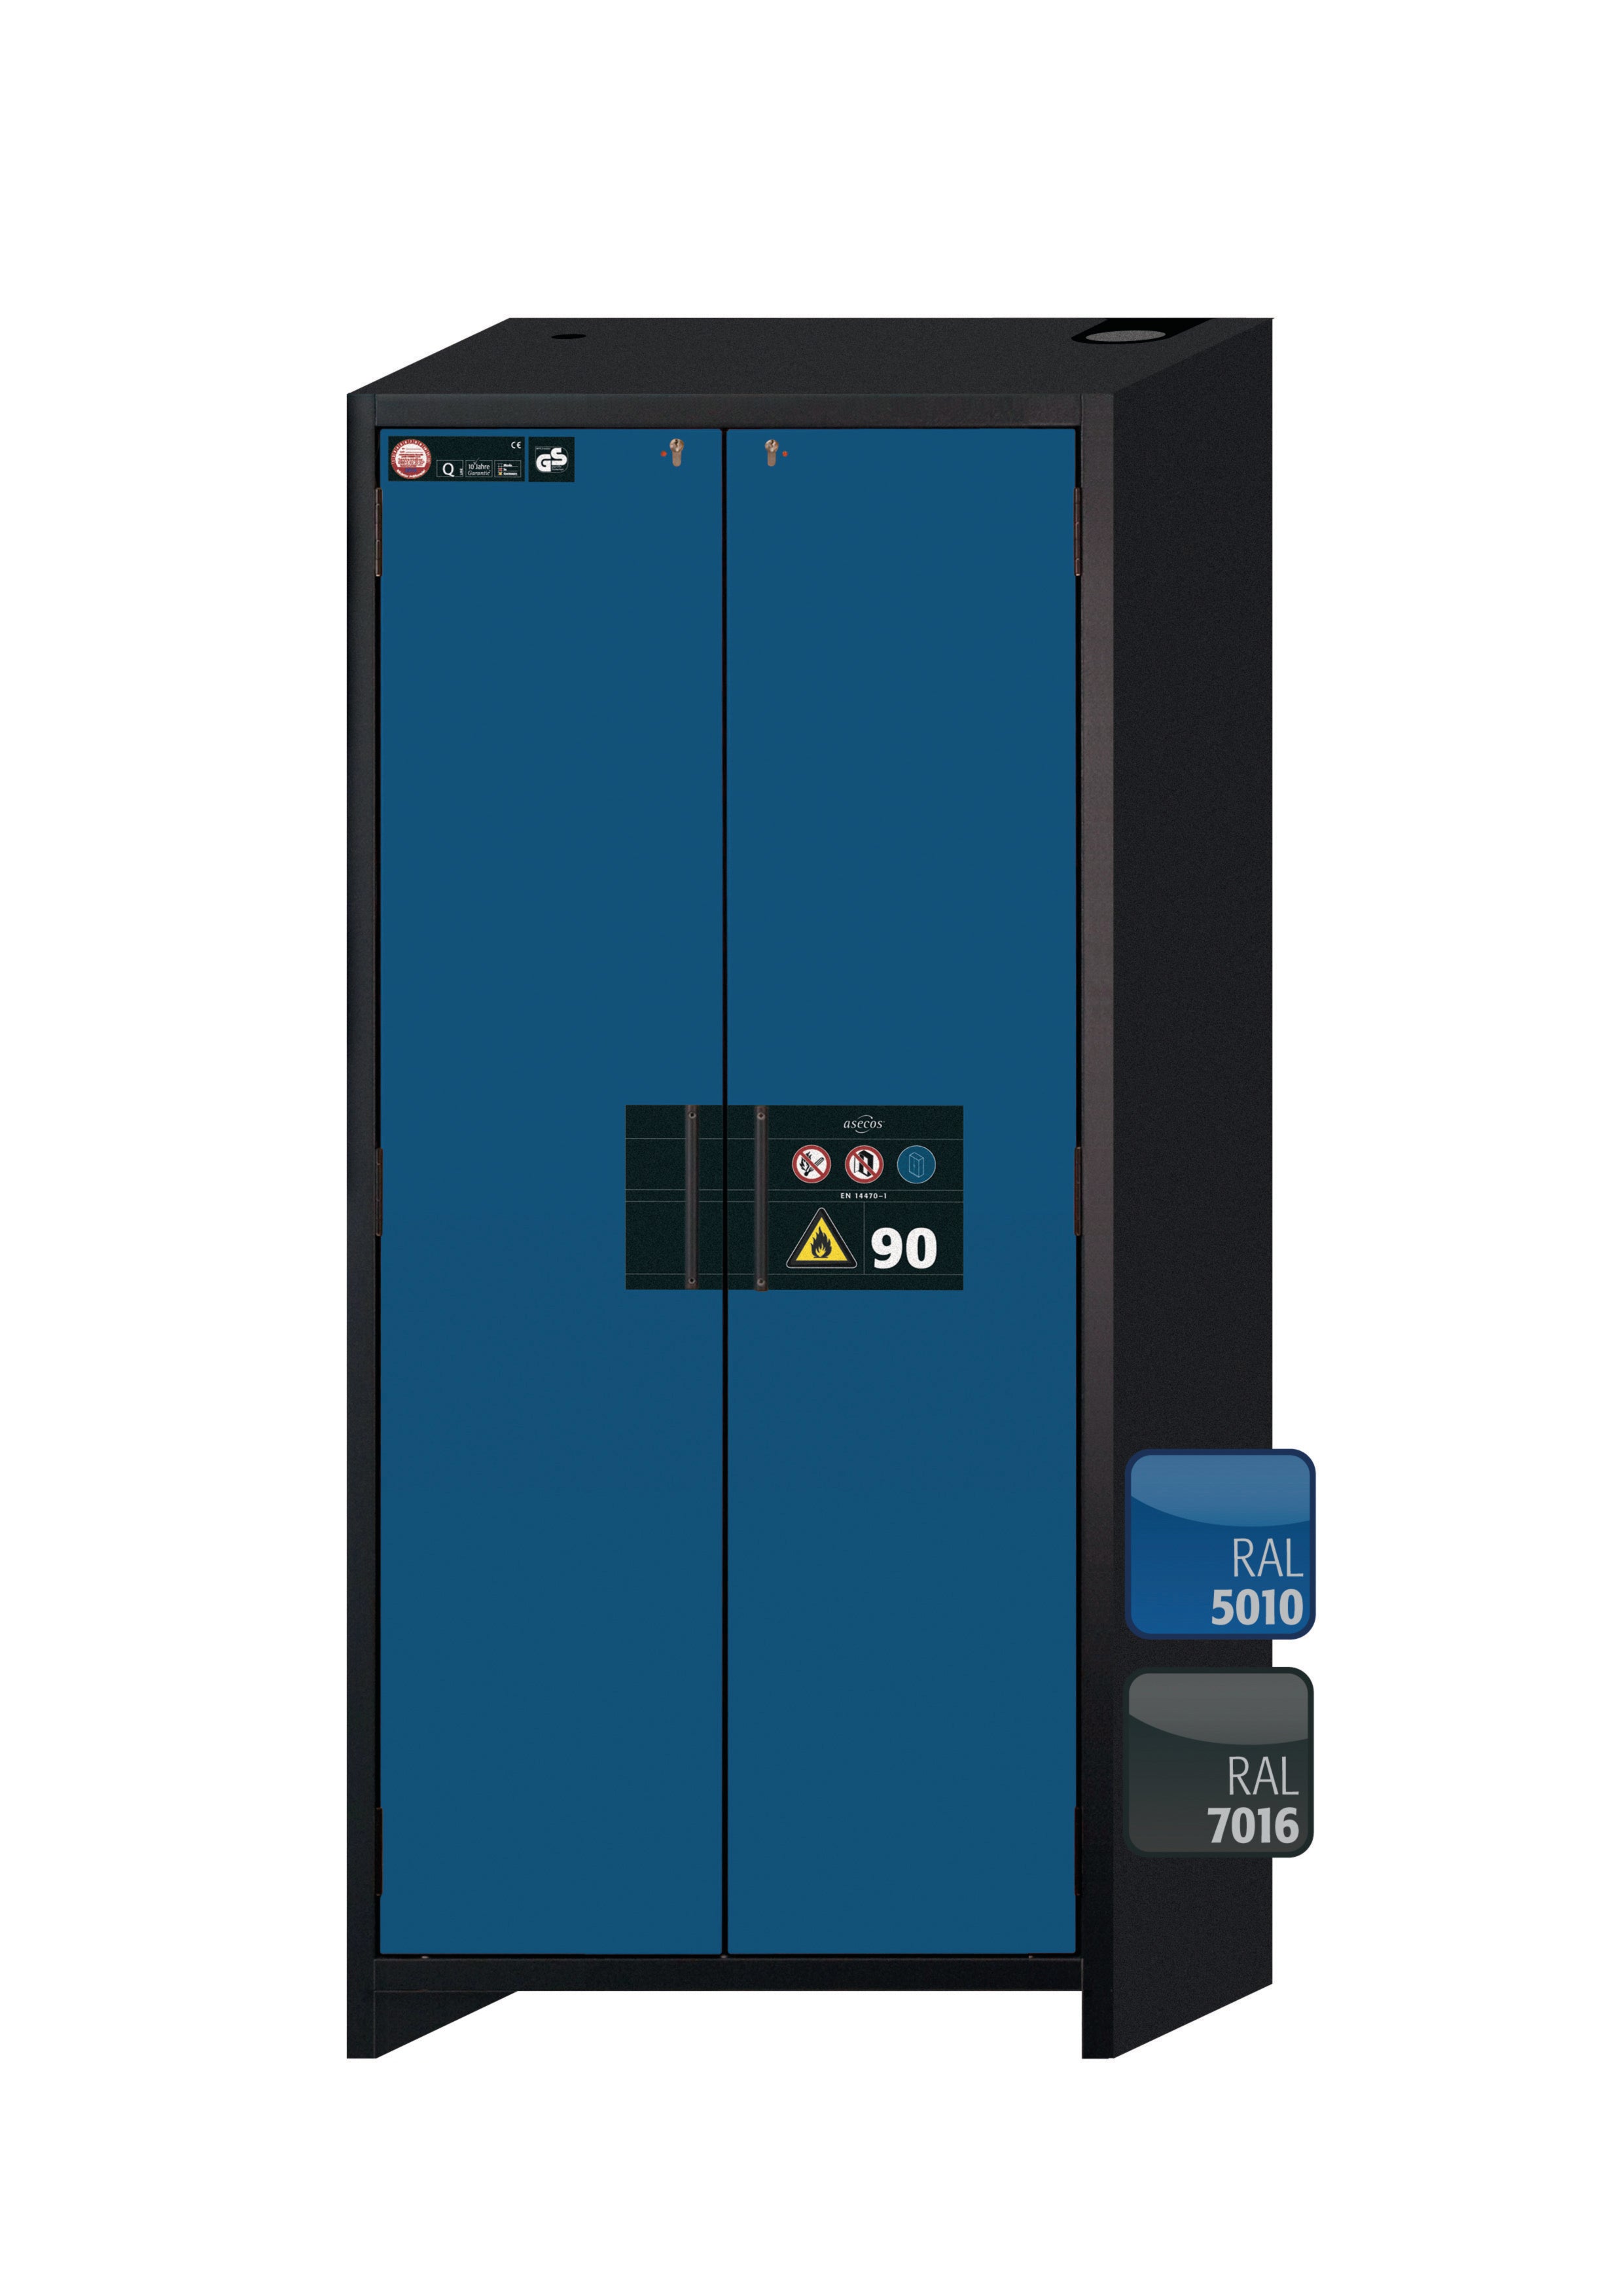 Type 90 safety storage cabinet Q-CLASSIC-90 model Q90.195.090 in gentian blue RAL 5010 with 5x drawer (standard) (sheet steel),